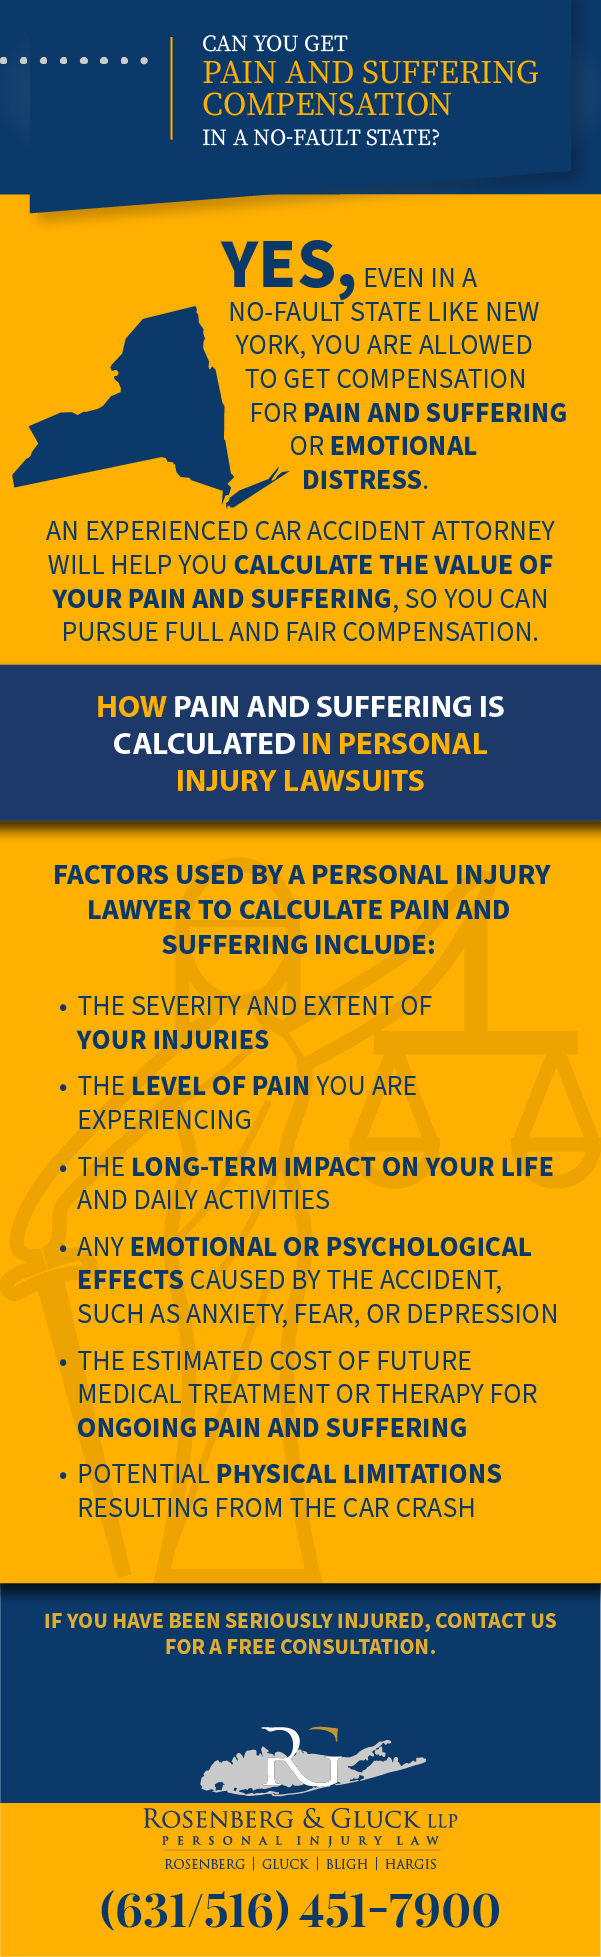 Can You Get Pain and Suffering Compensation in a No-Fault State?